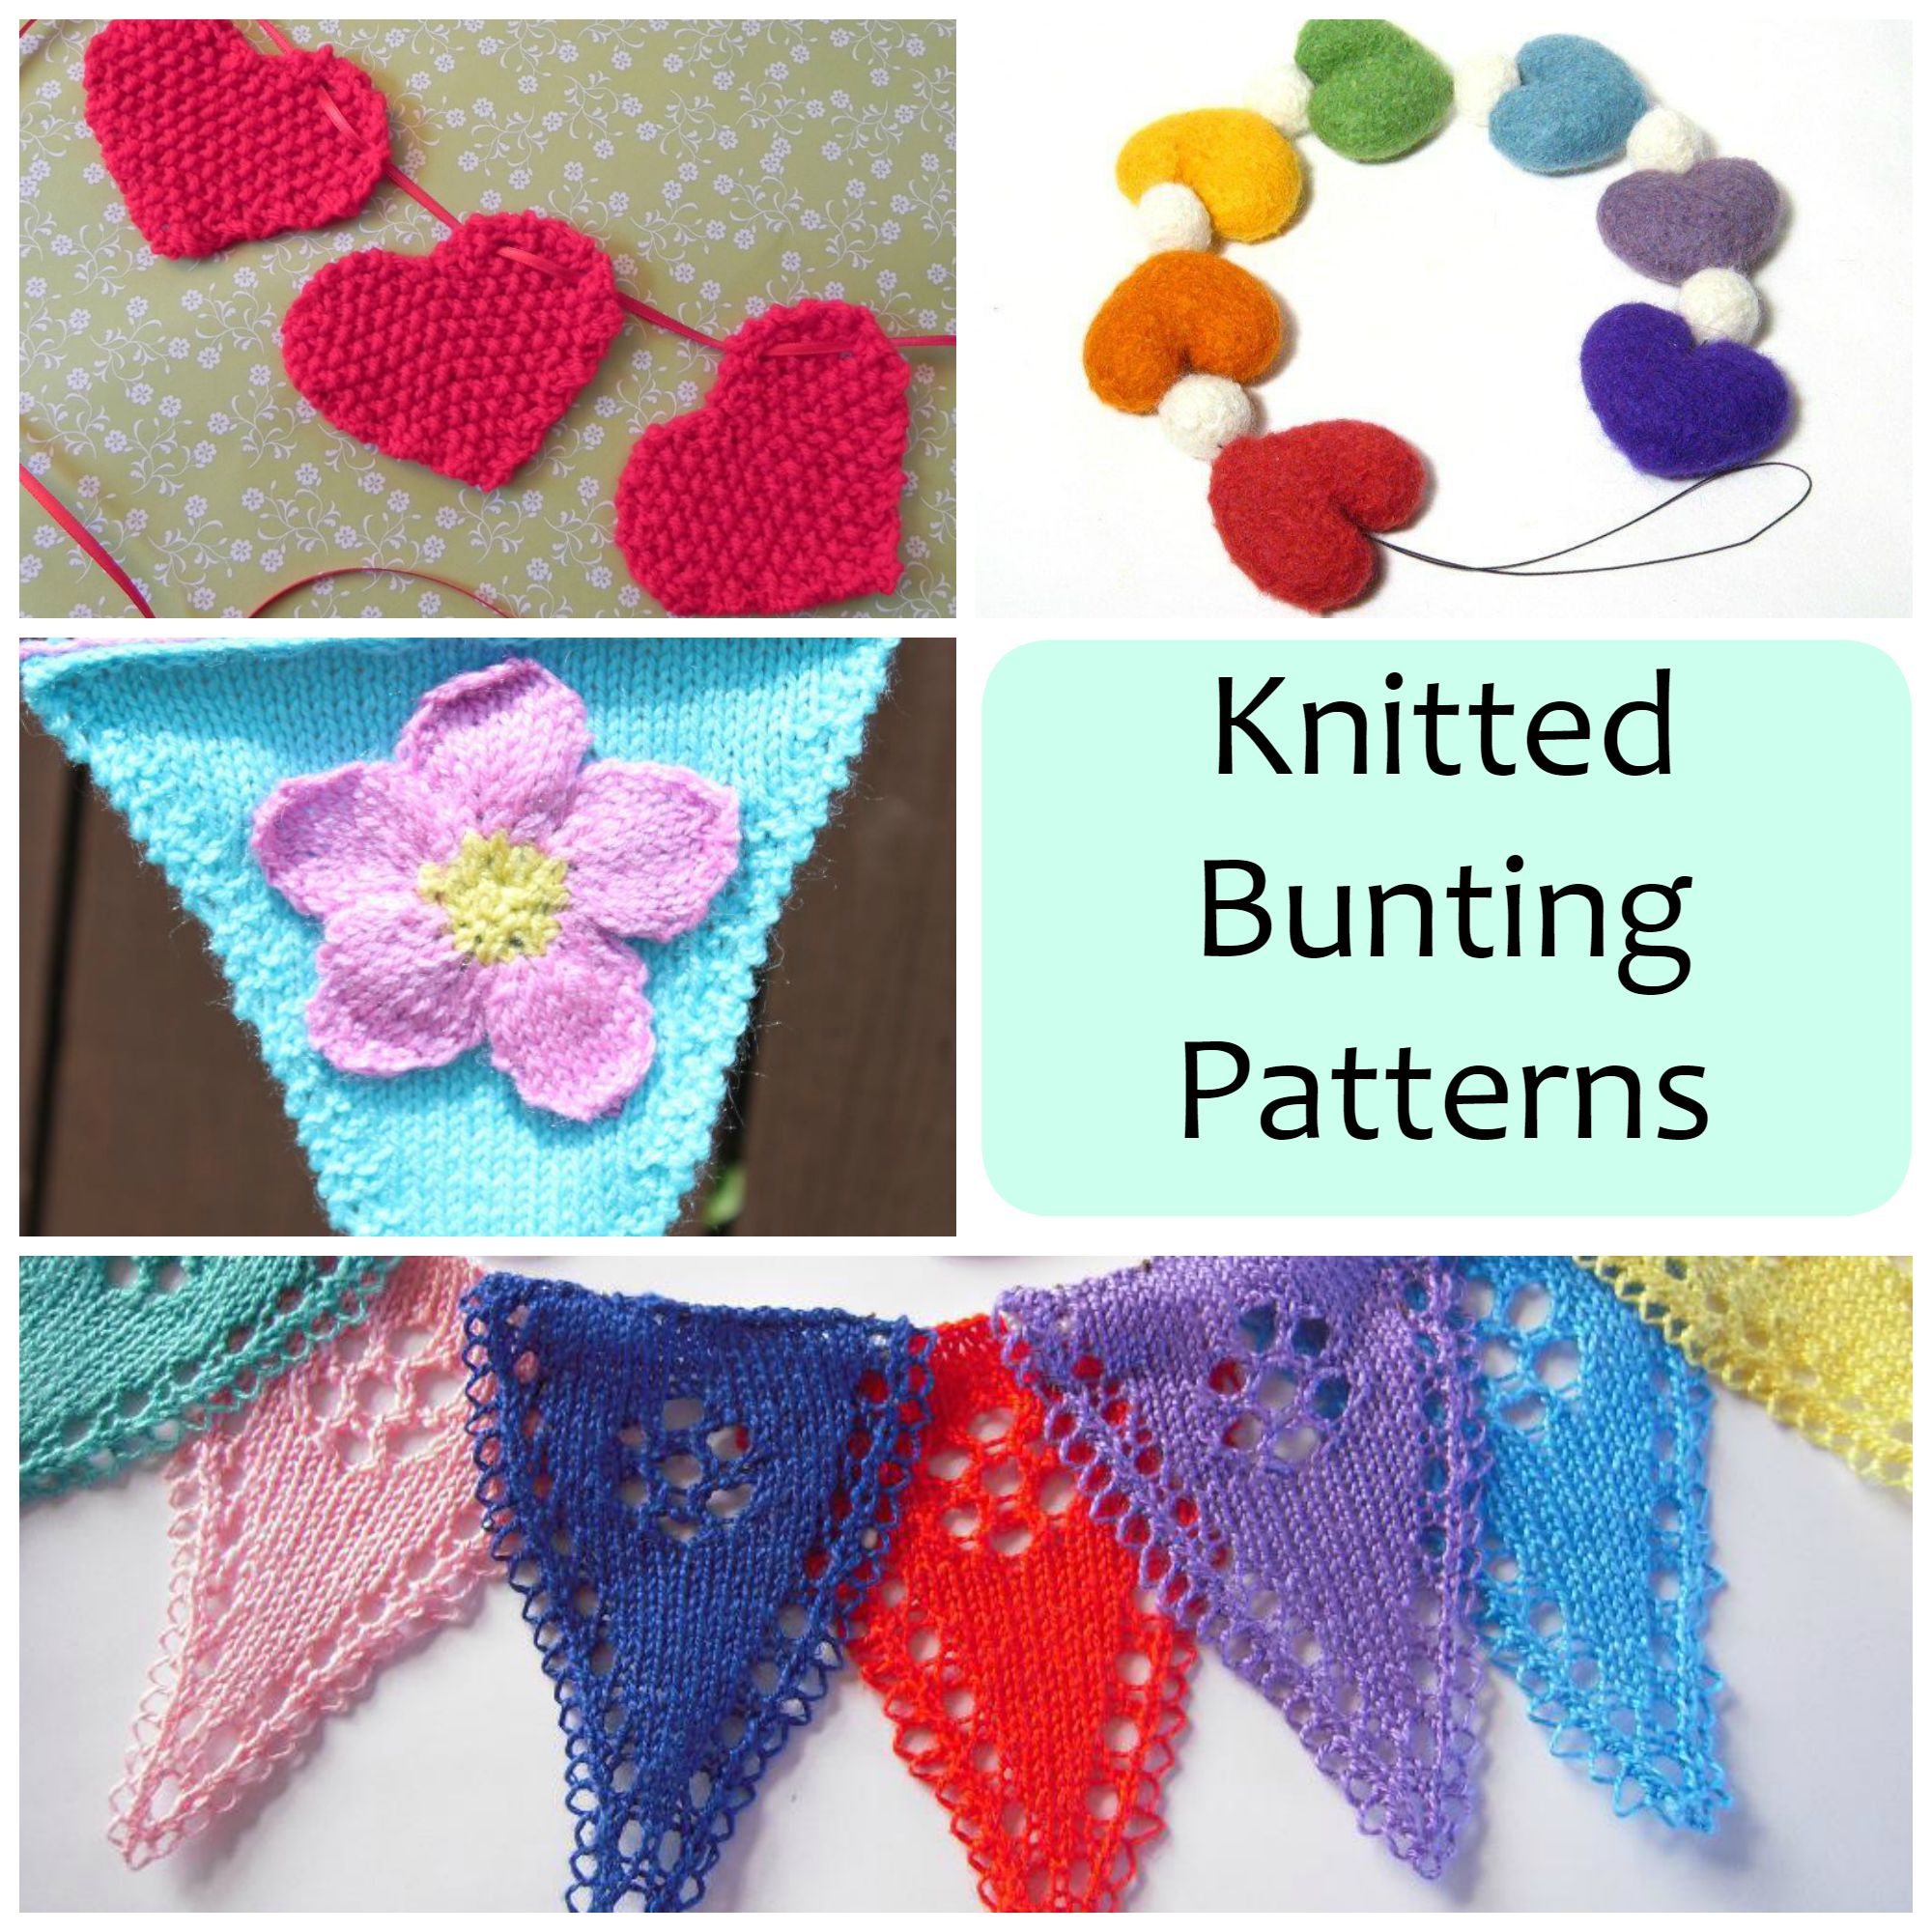 Knitted Bunting Patterns